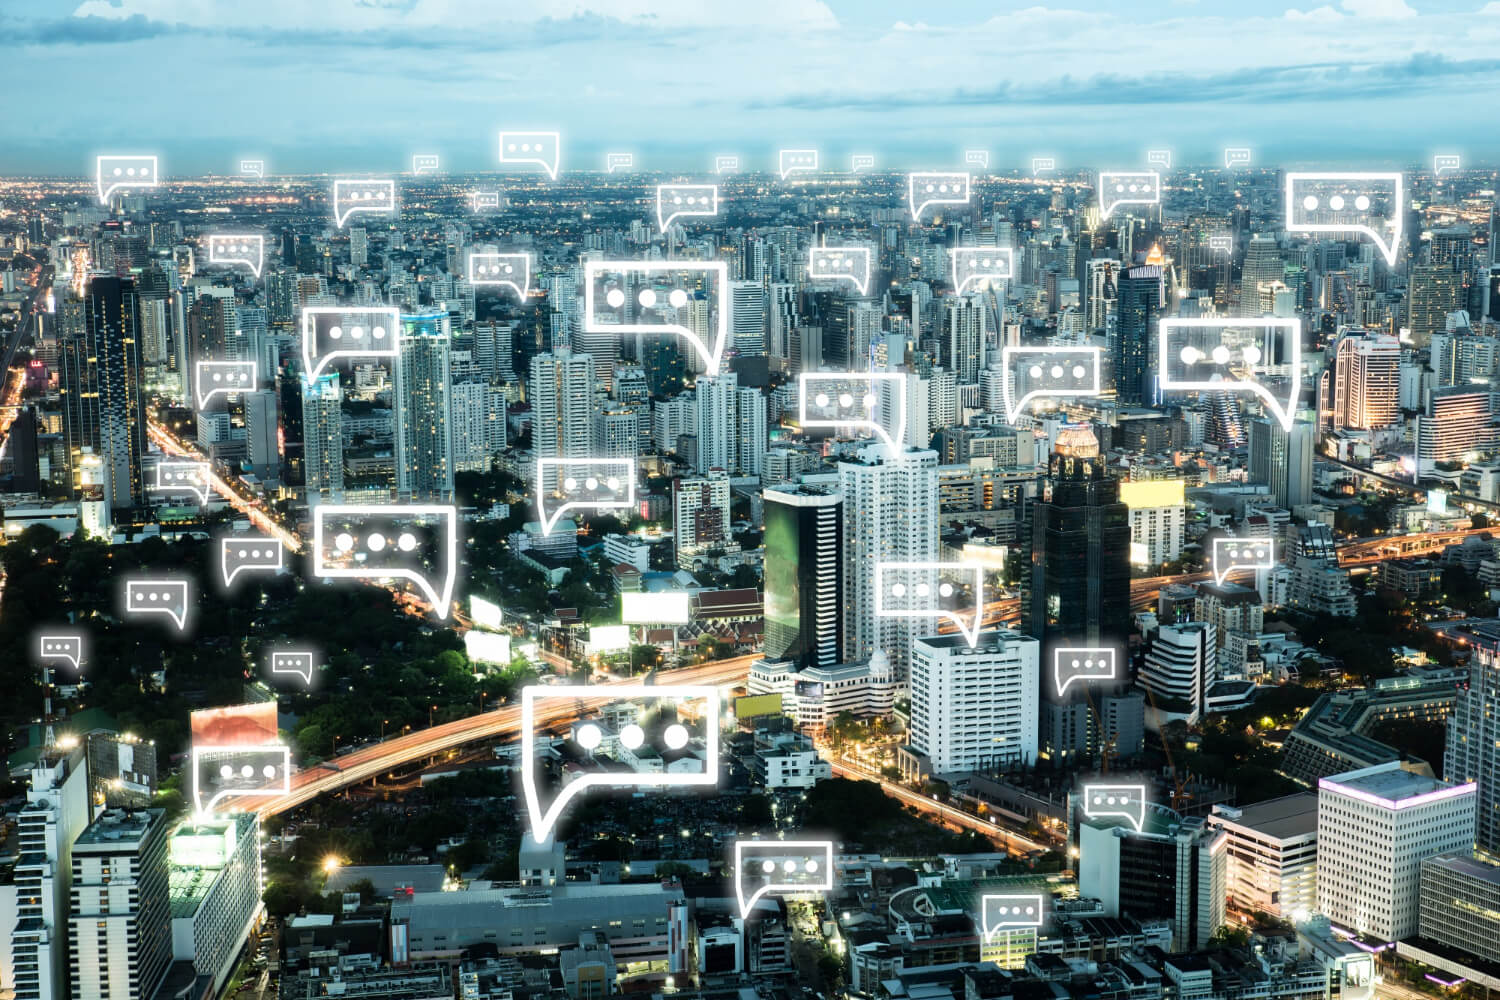 The city of bangkok is covered in social media icons.